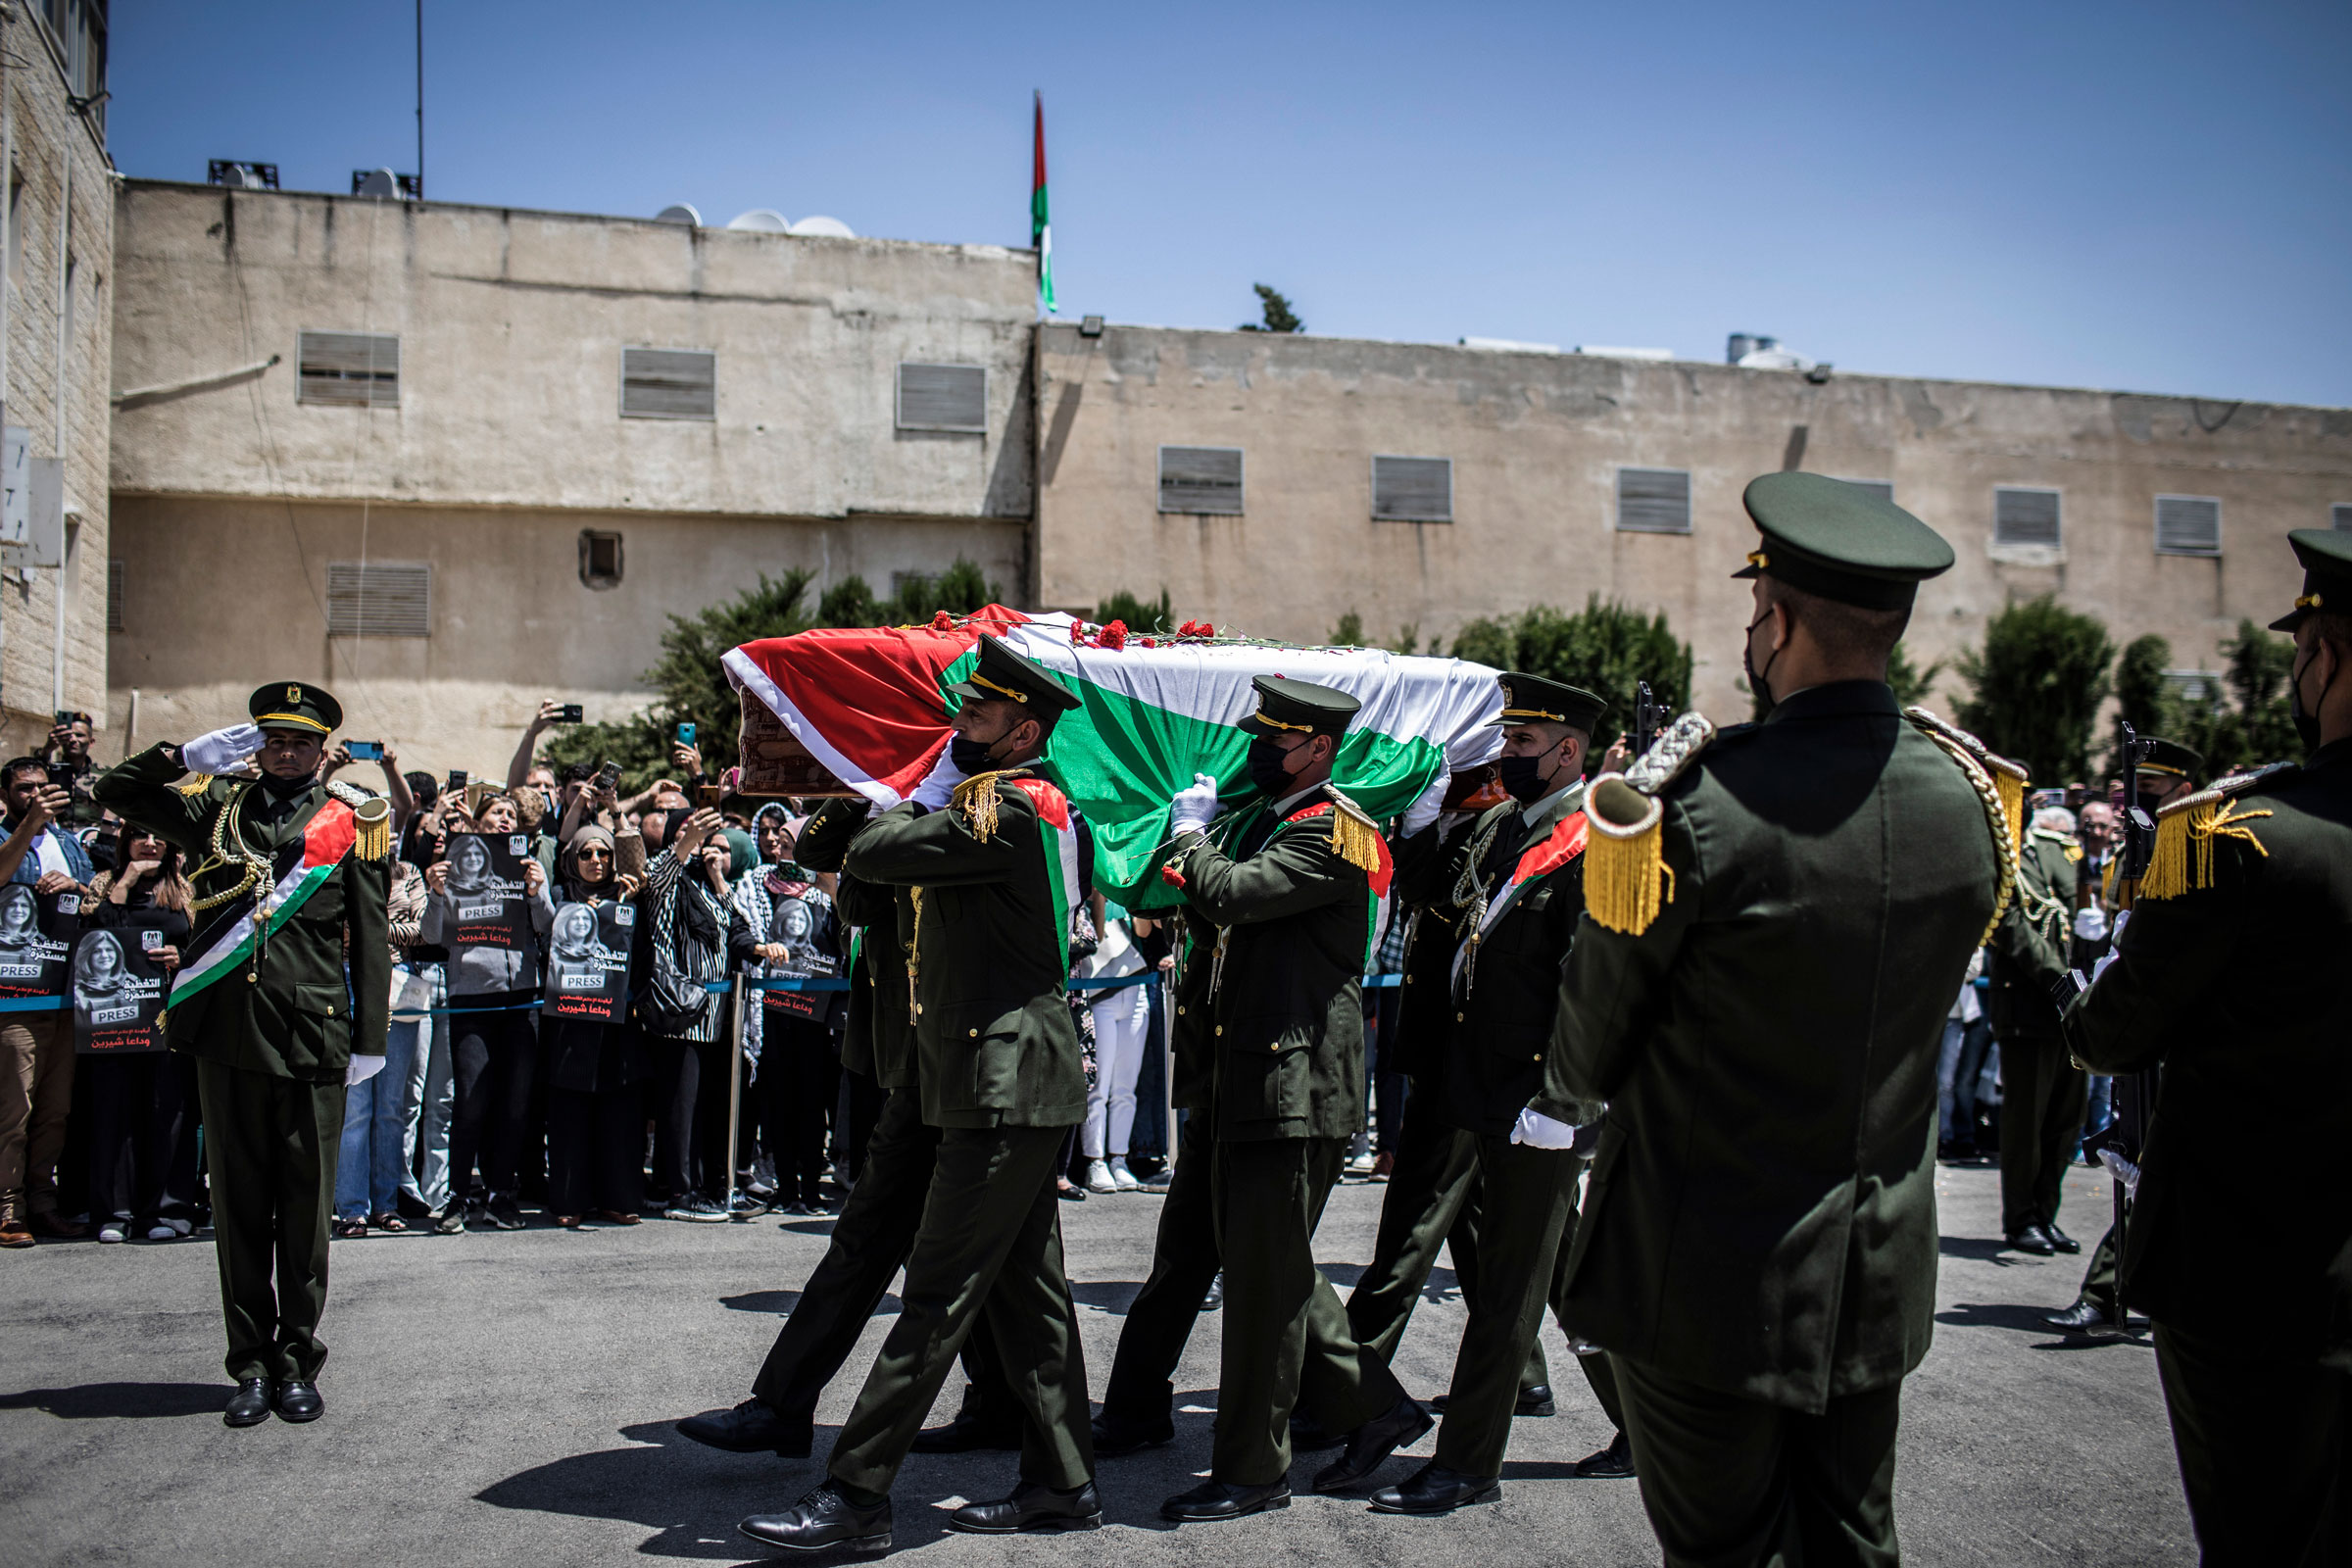 Palestinian honor guards carry the flag-wrapped coffin of Al Jazeera reporter Shireen Abu Akleh during a state funeral at President's Residency in Ramallah. (Ilia Yefimovich—picture alliance/Getty Images)